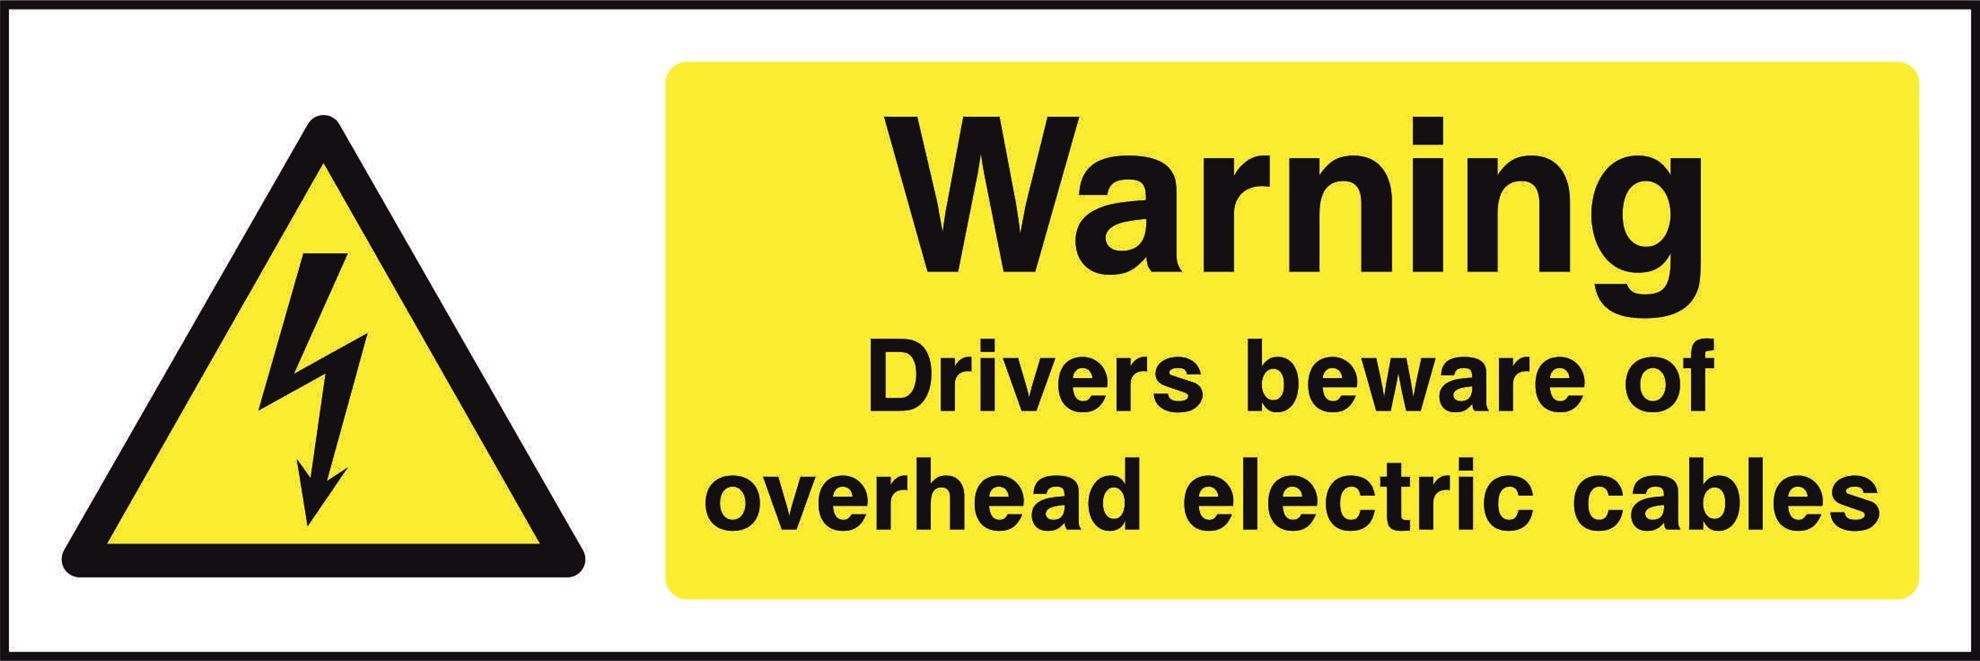 Warning Drivers beware of overhead electric cables